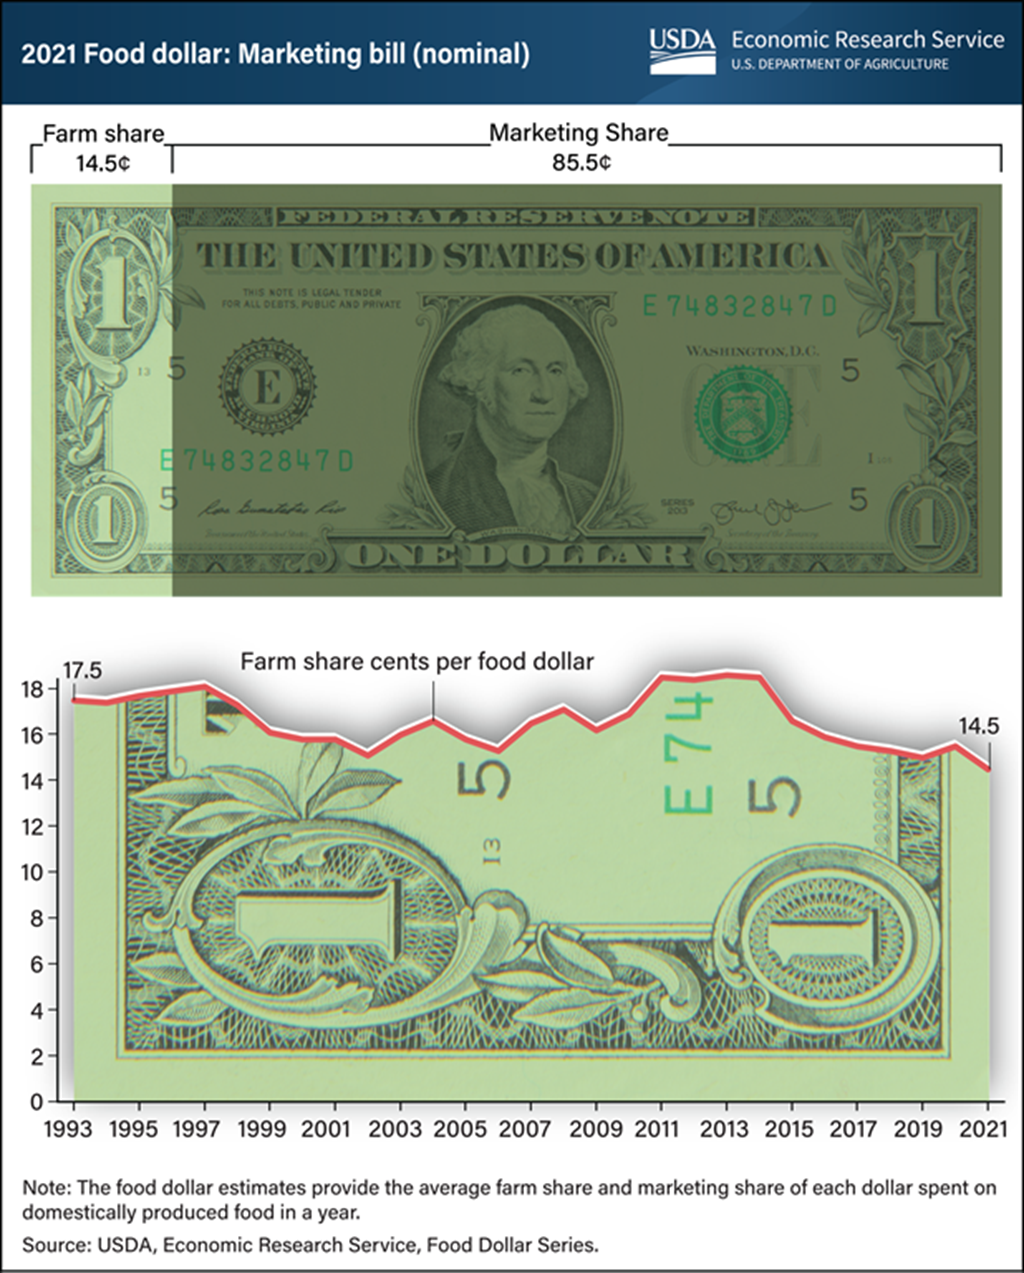 Farm Share of U.S. Food Dollar reached Historic Low in 2021